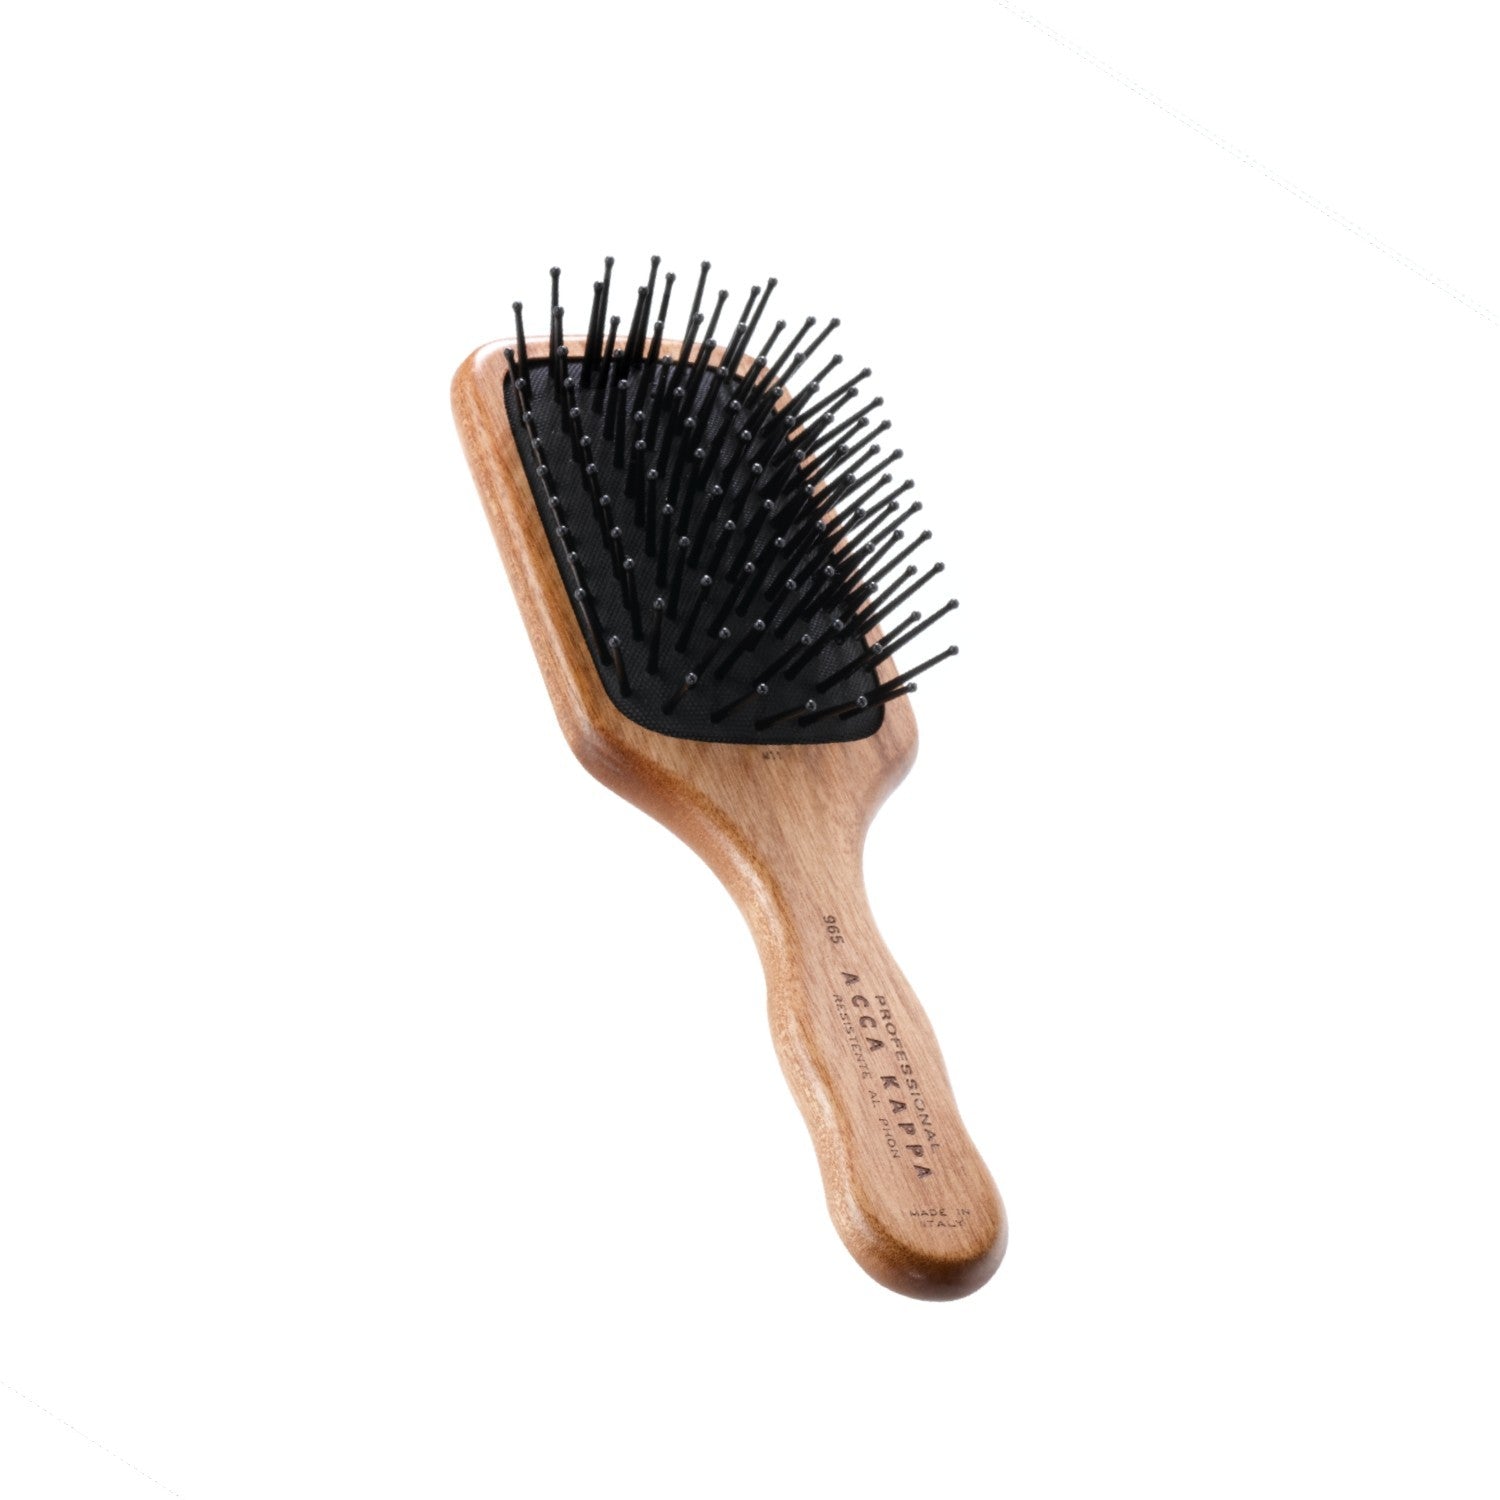 ACCA KAPPA Travel Classic Paddle Brush with heat resistant nylon pins